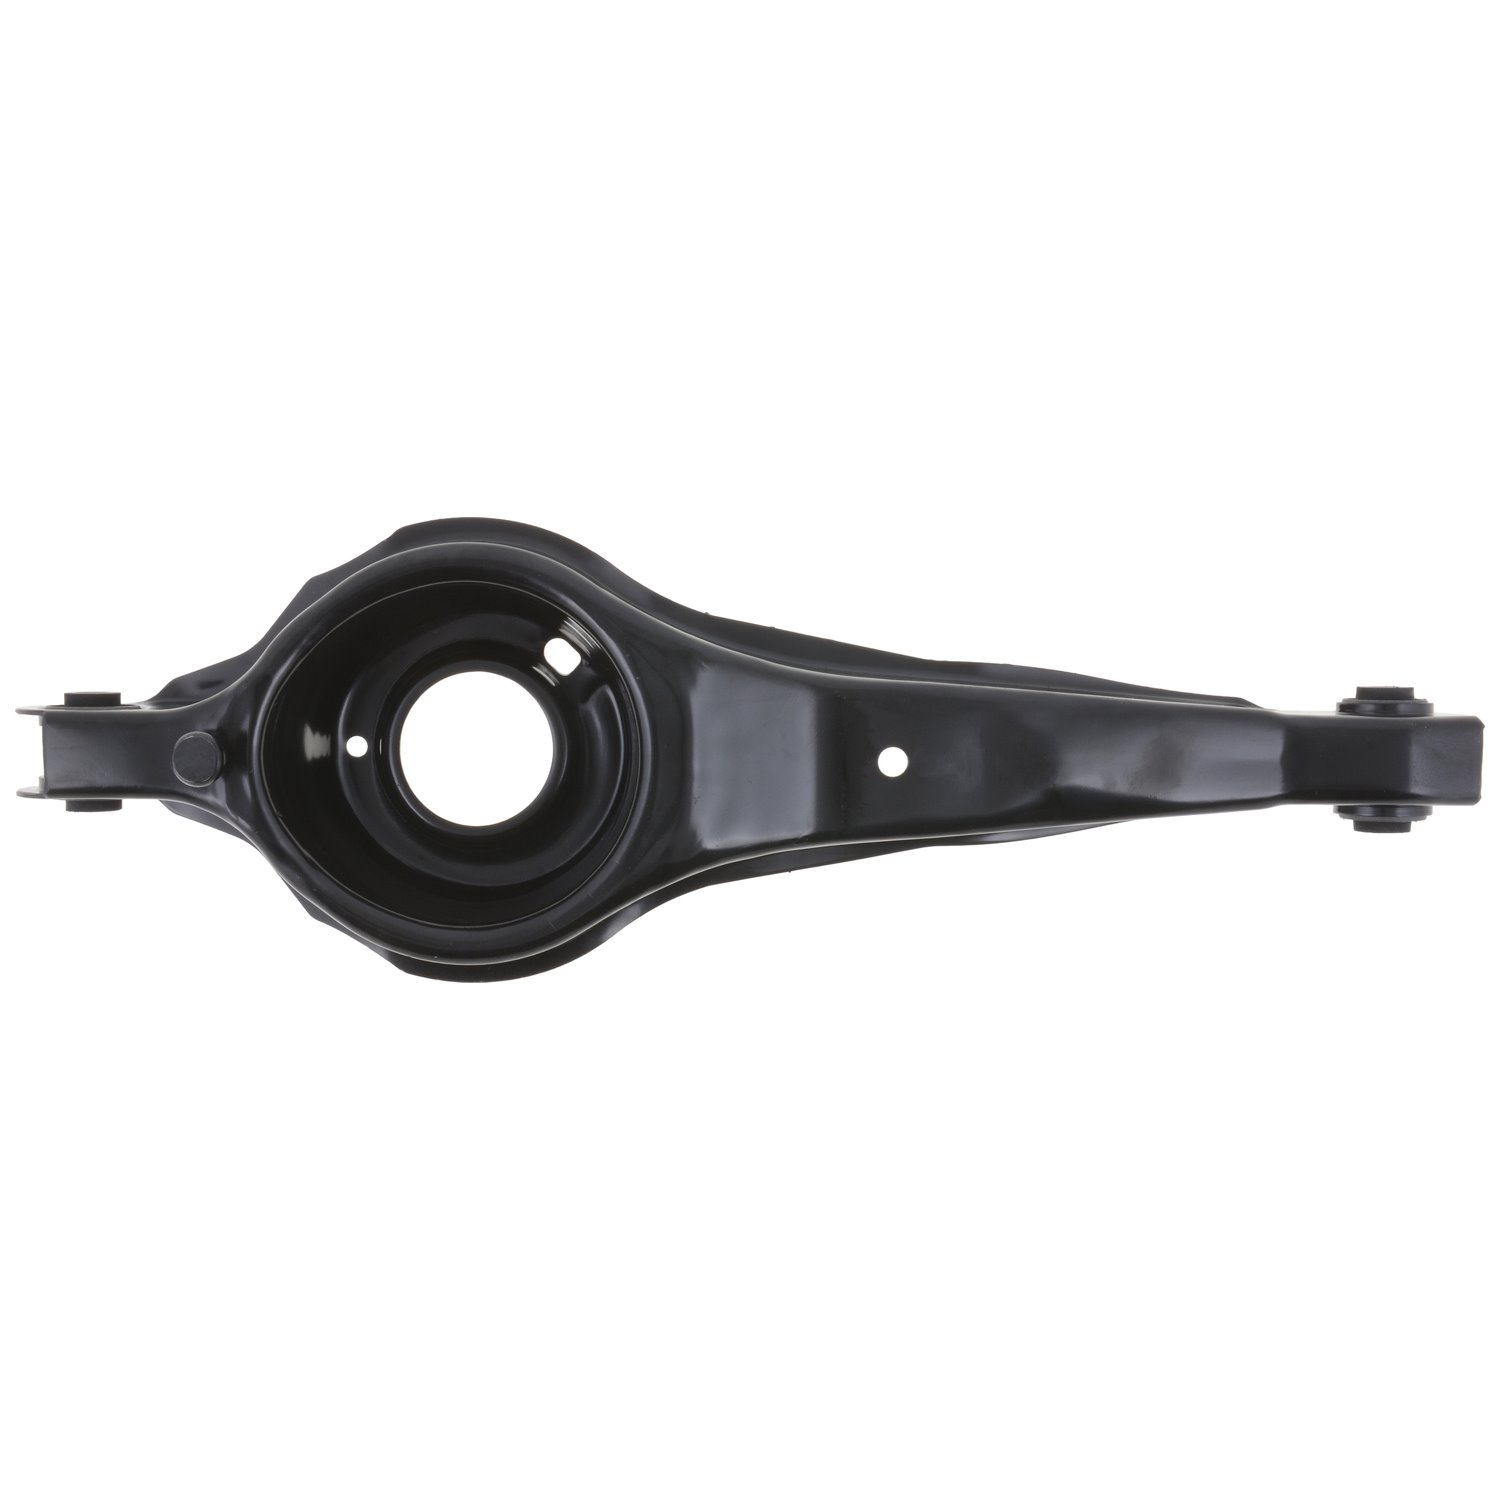 JTC2458 Control Arm Fits Select Mazda Models, Position: Left/Driver or Right/Passenger, Rear Lower Rearward